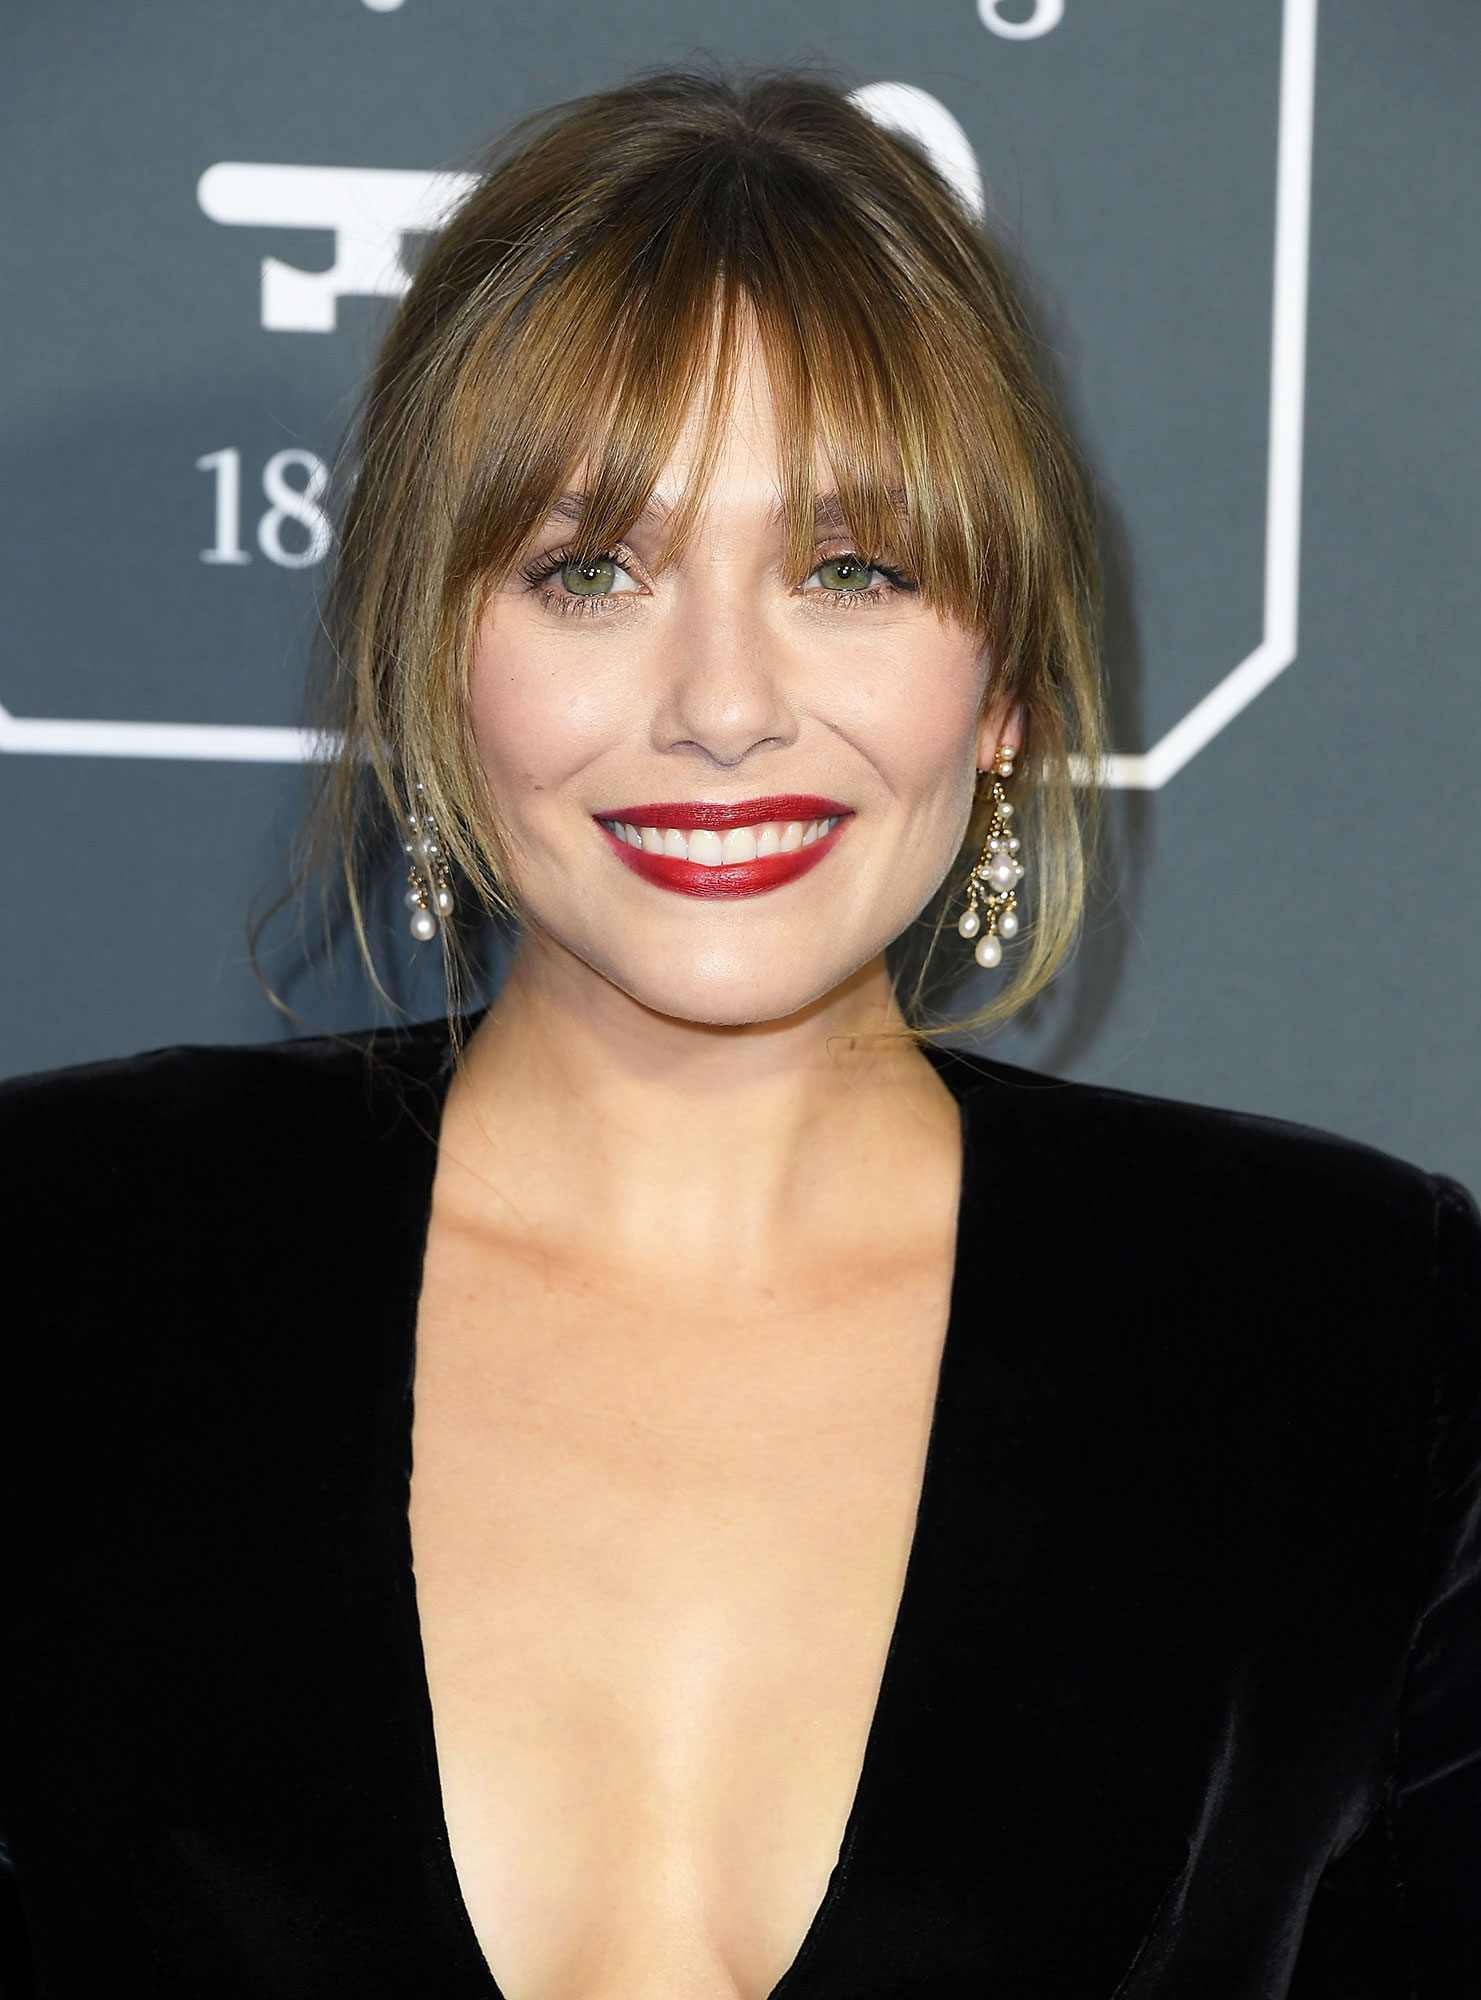 14 Types of Bangs for Every Face Shape and Hair Texture